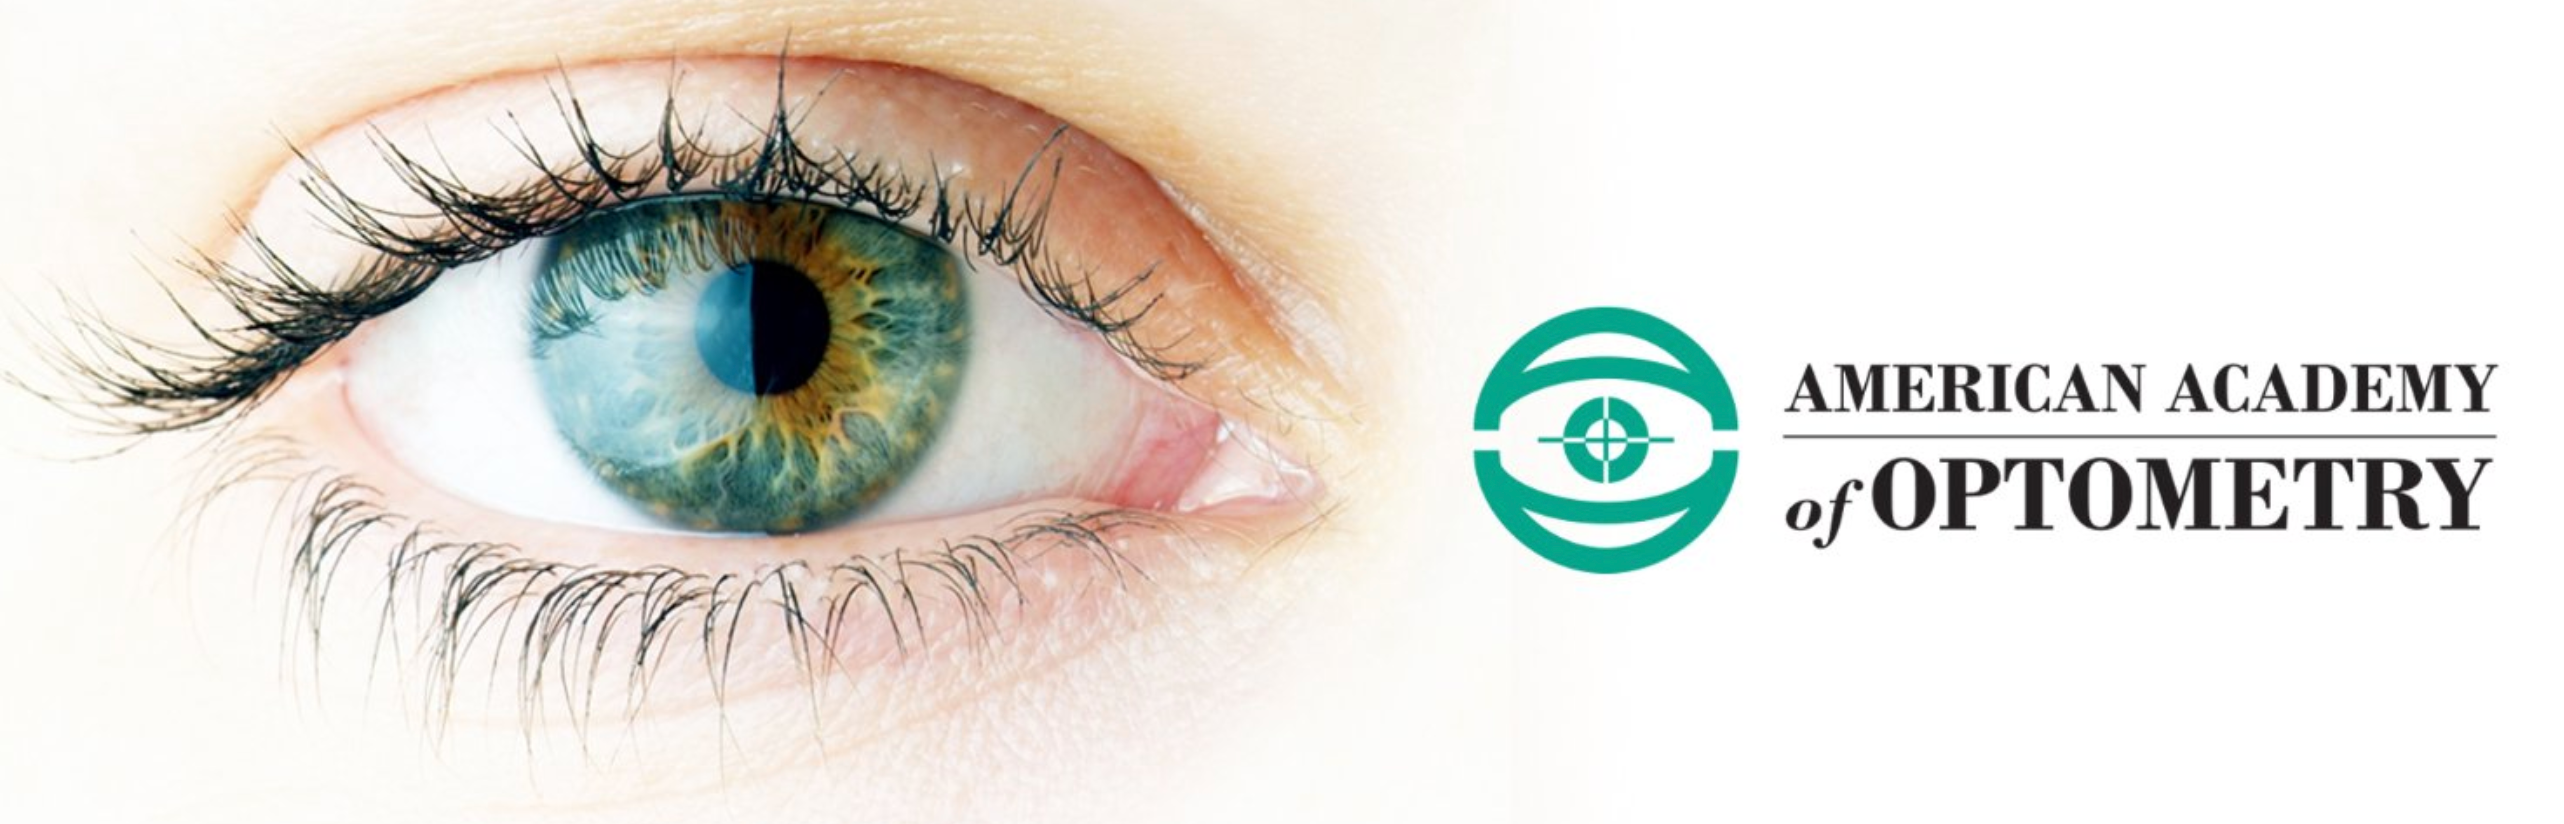 3rd IVI International Optometry Conference – Eye Health in a Changing World  - World Council of Optometry